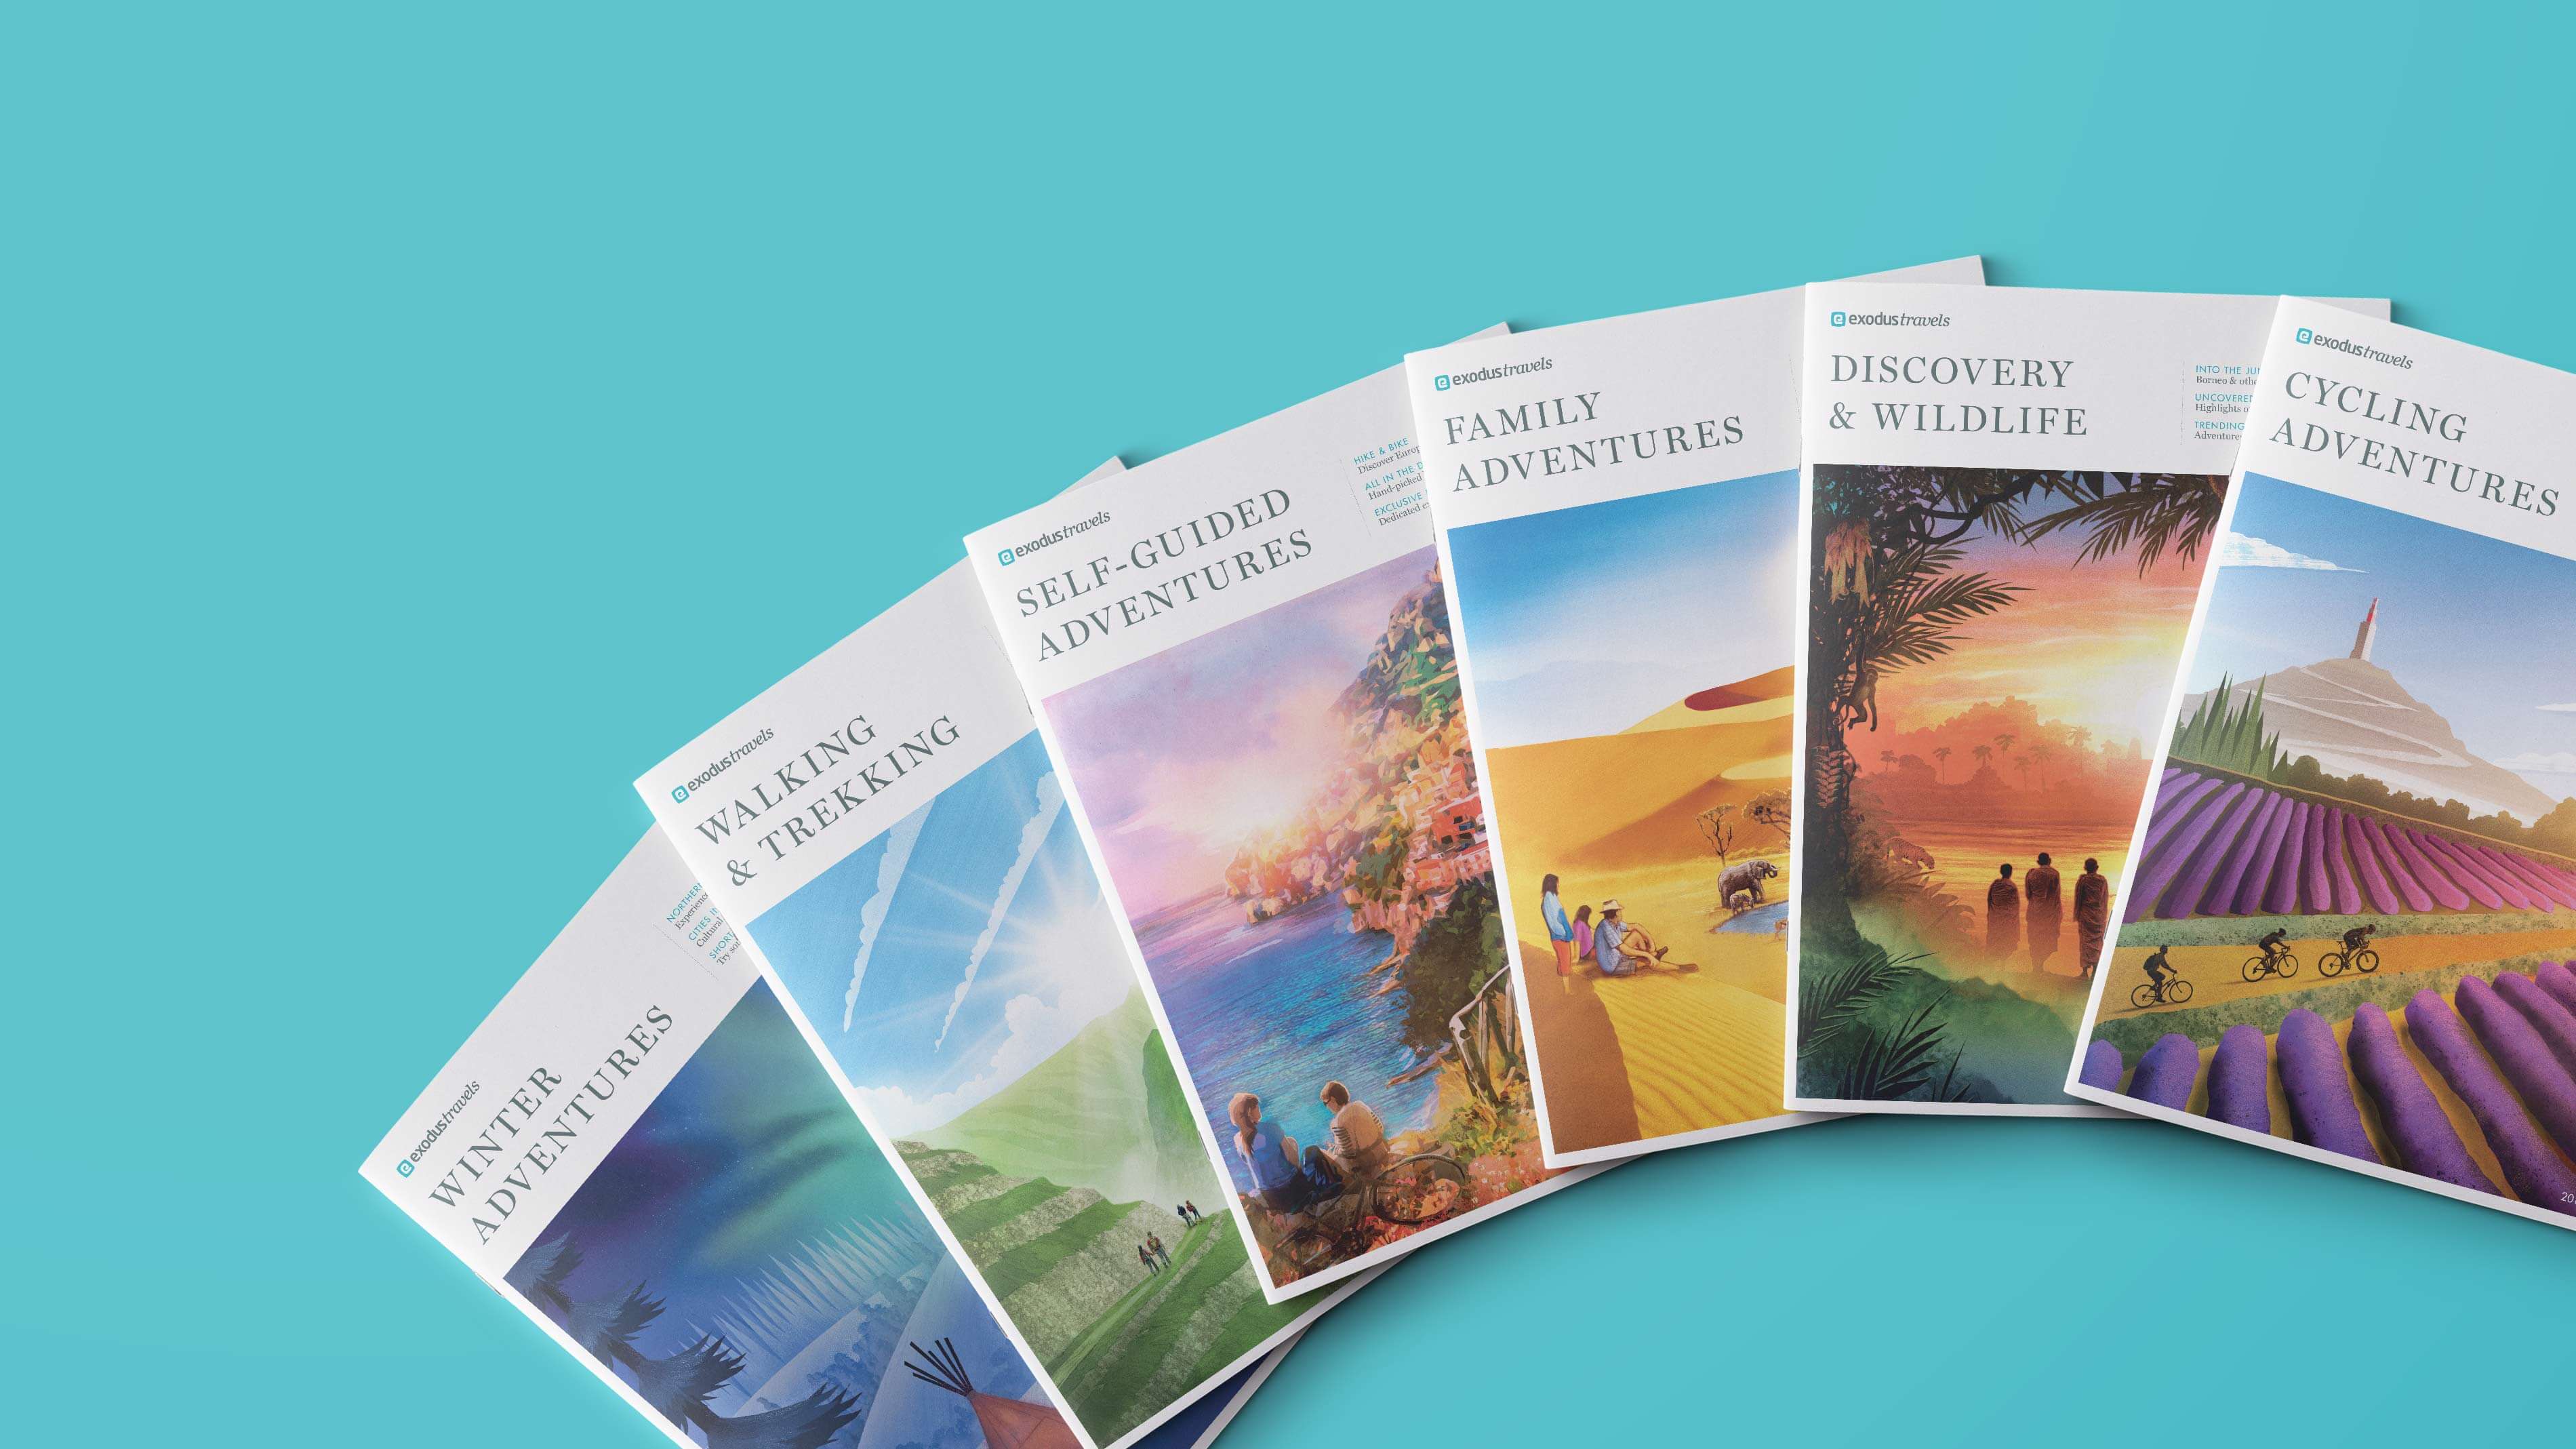  Beautiful travel brochure design that doesn't rely on past successes